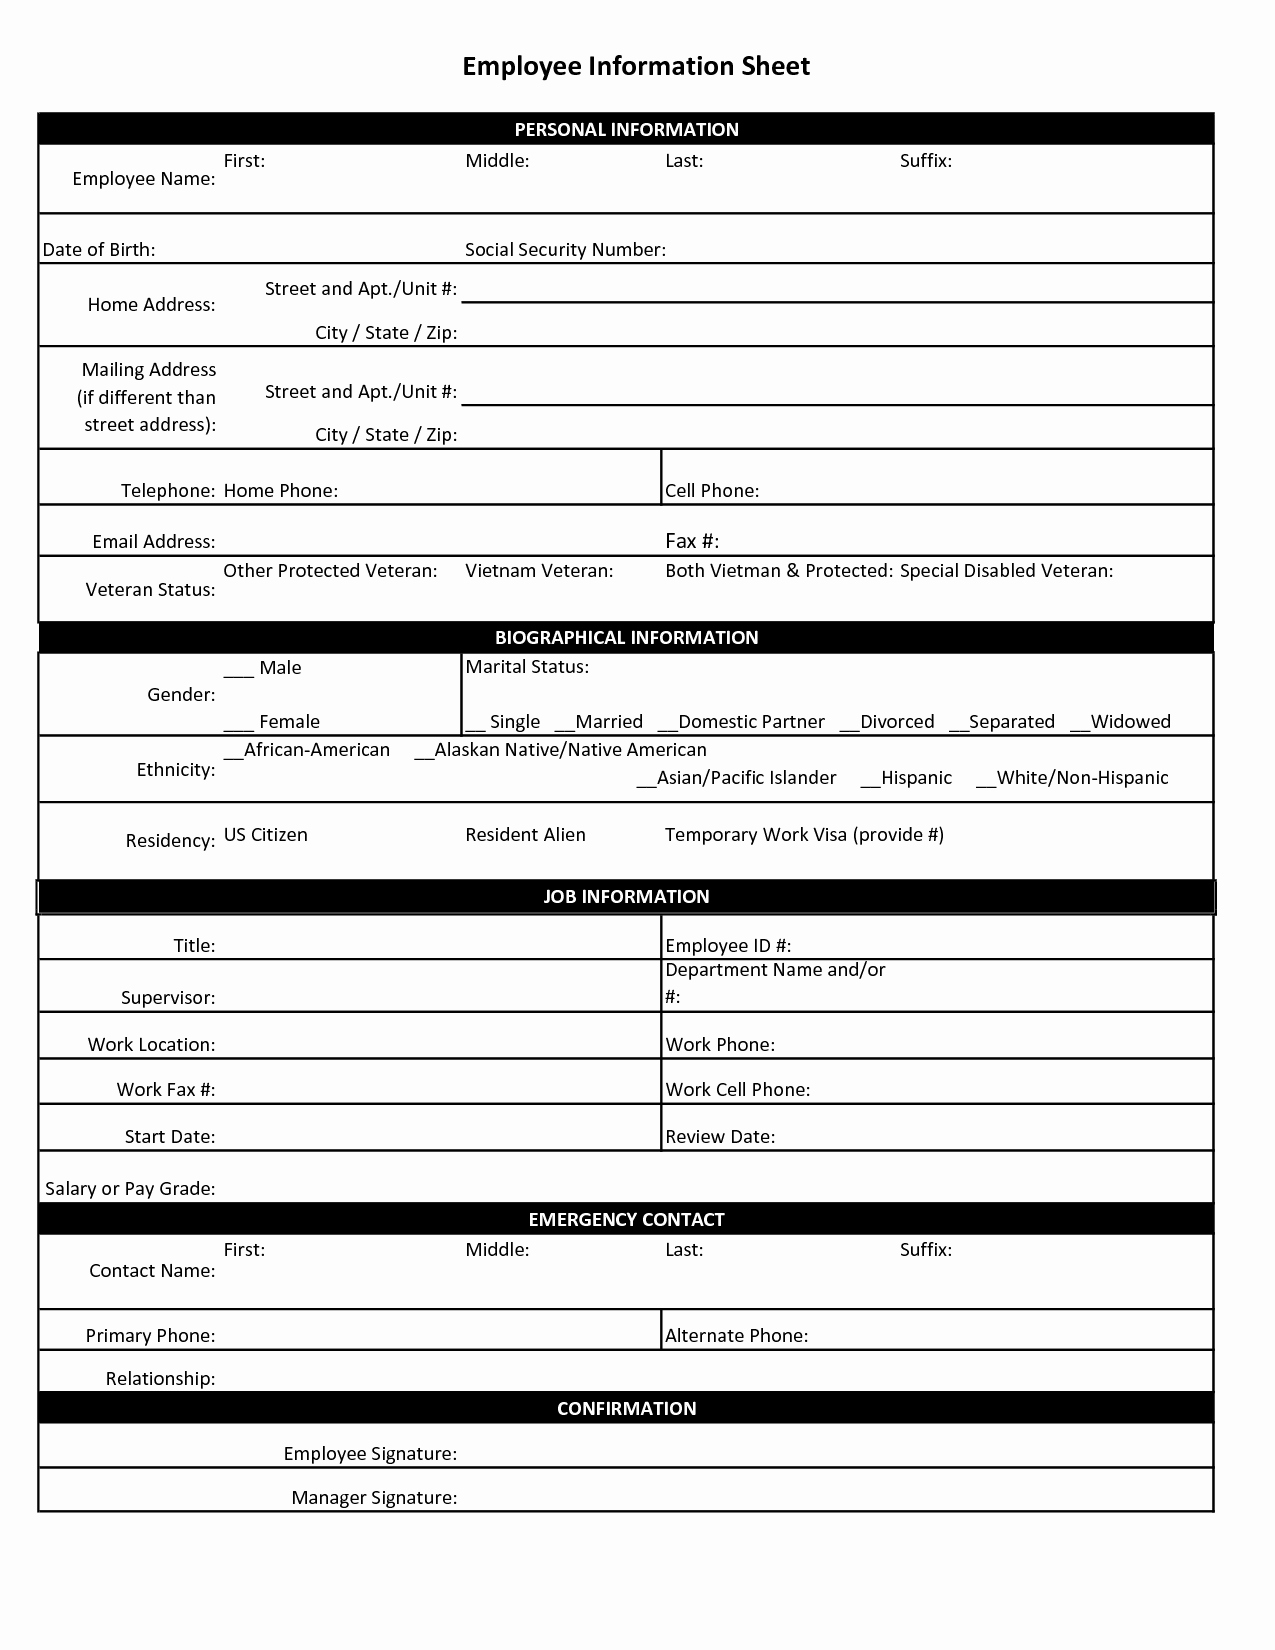 Employees Personal Information form Beautiful Employee Personal Information Sheet Hardsell